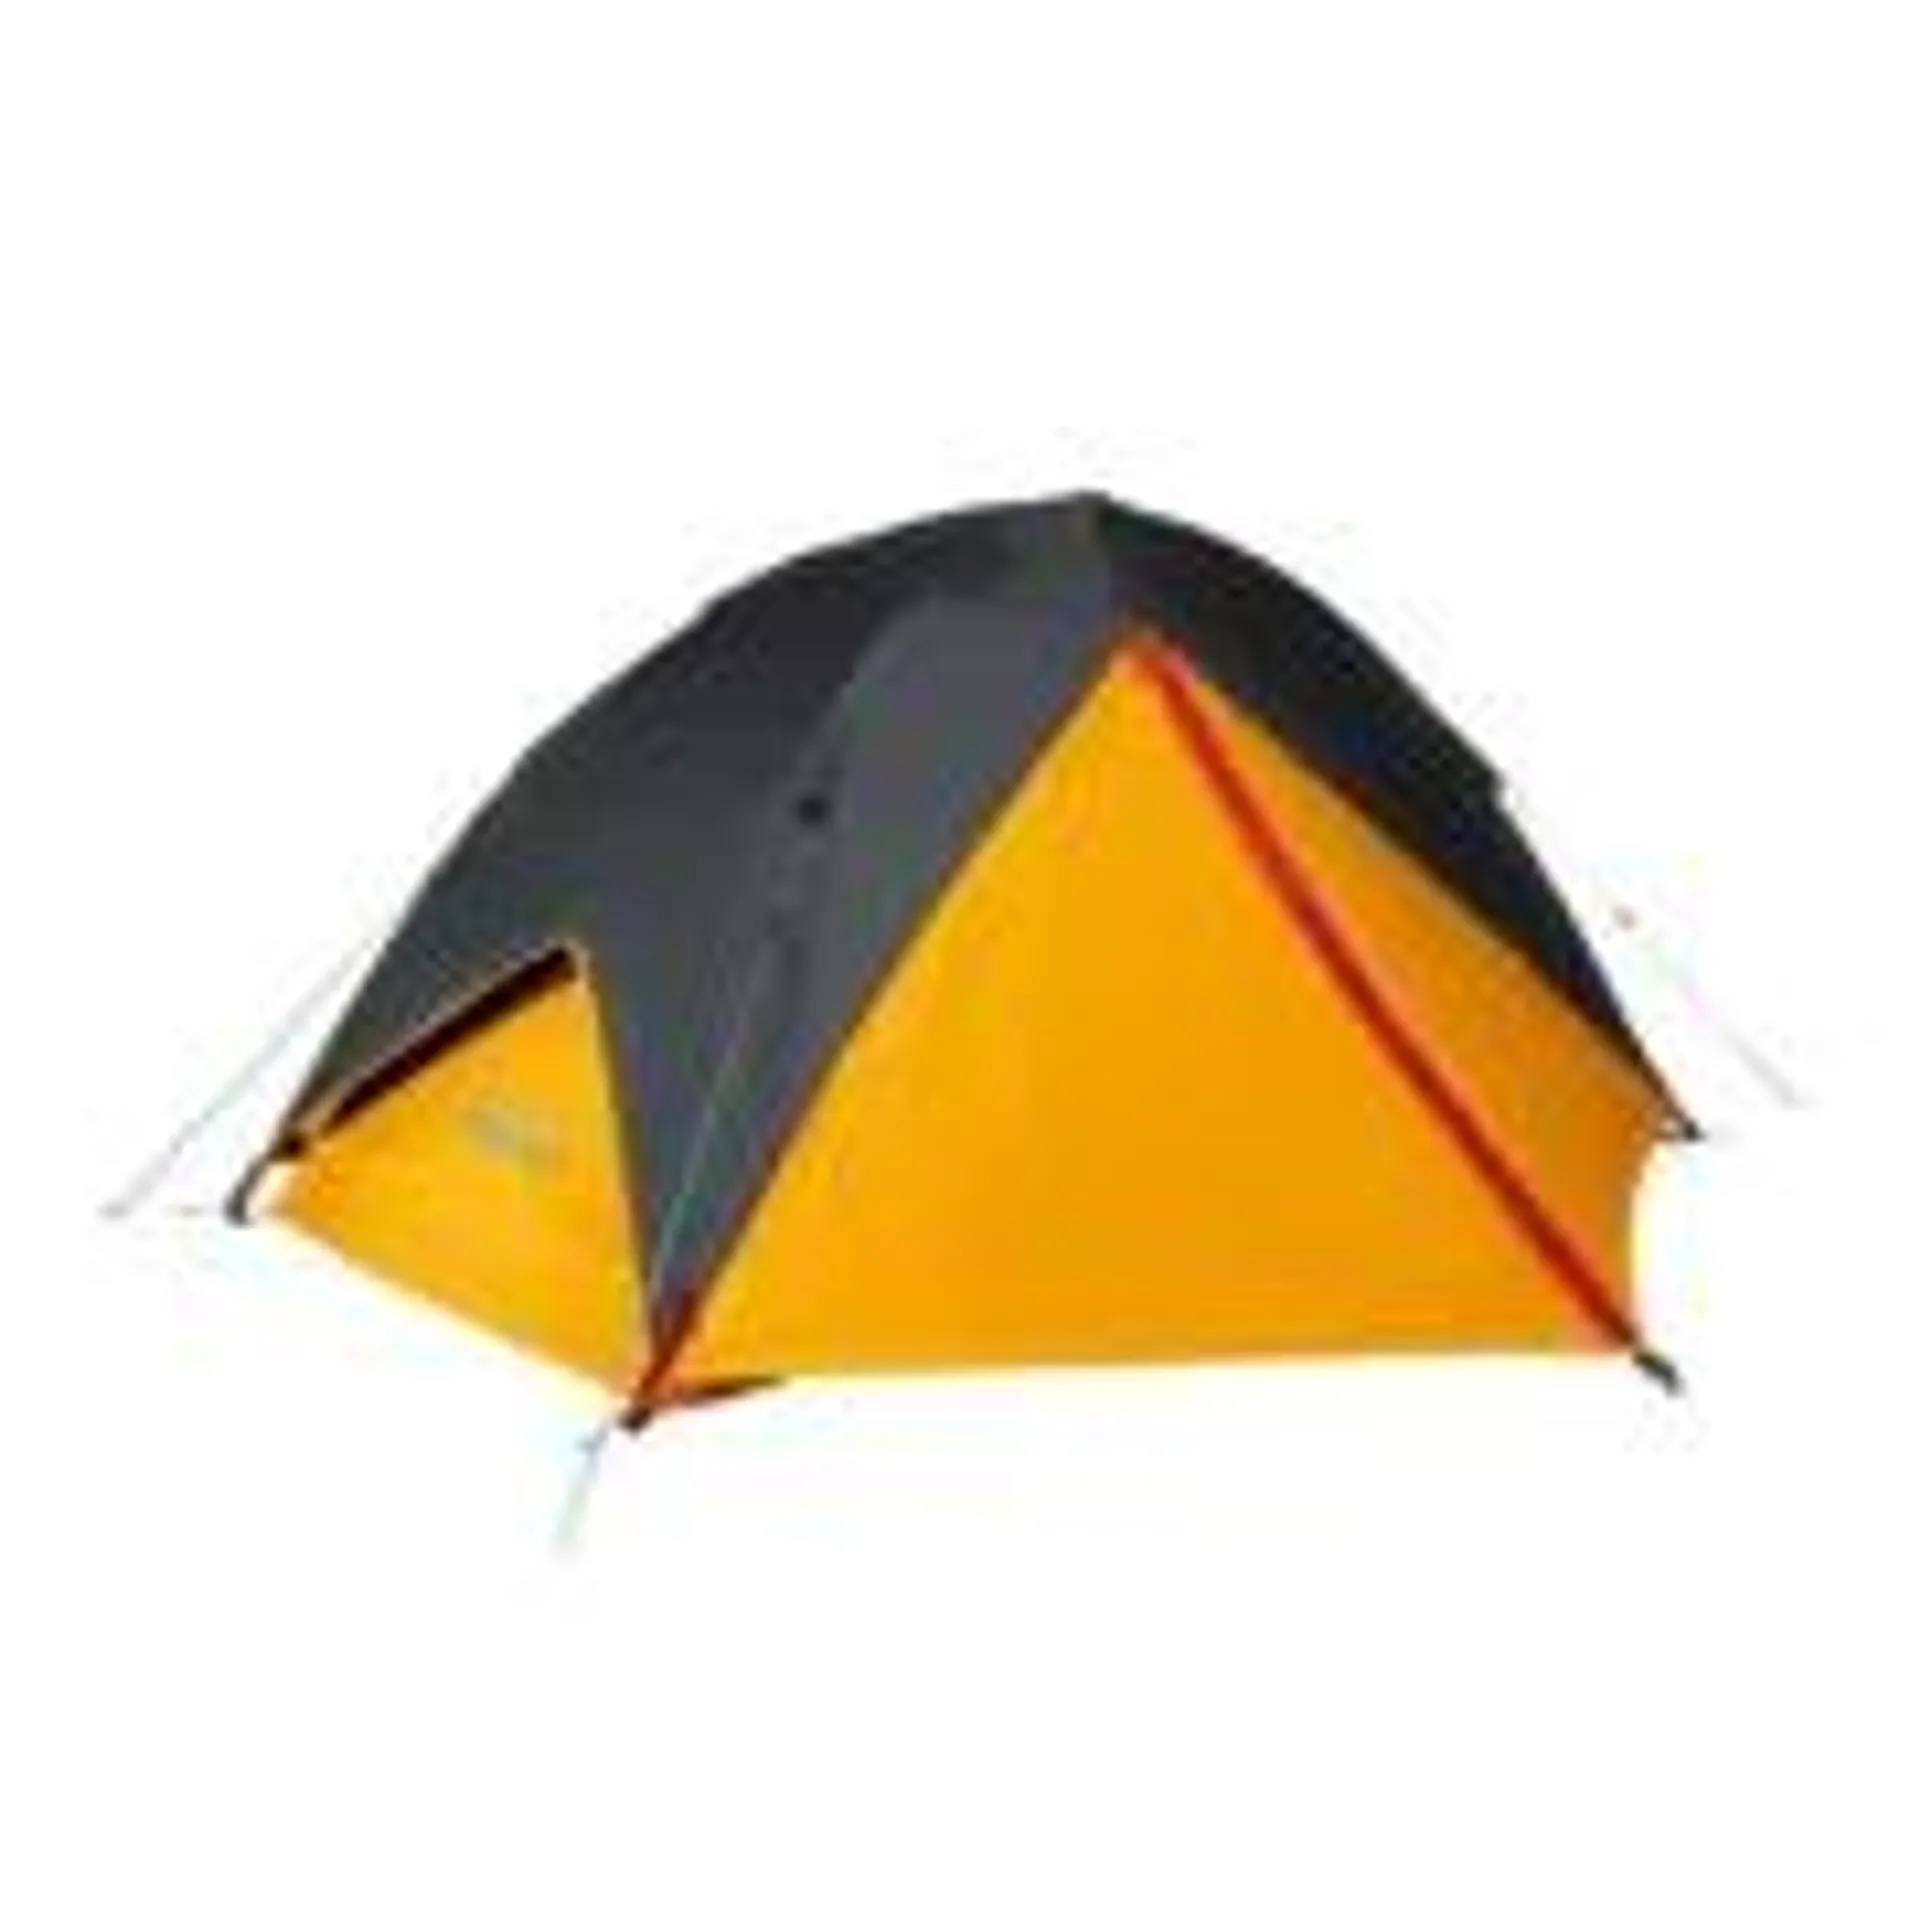 PEAK1™ 1-Person Backpacking Tent​